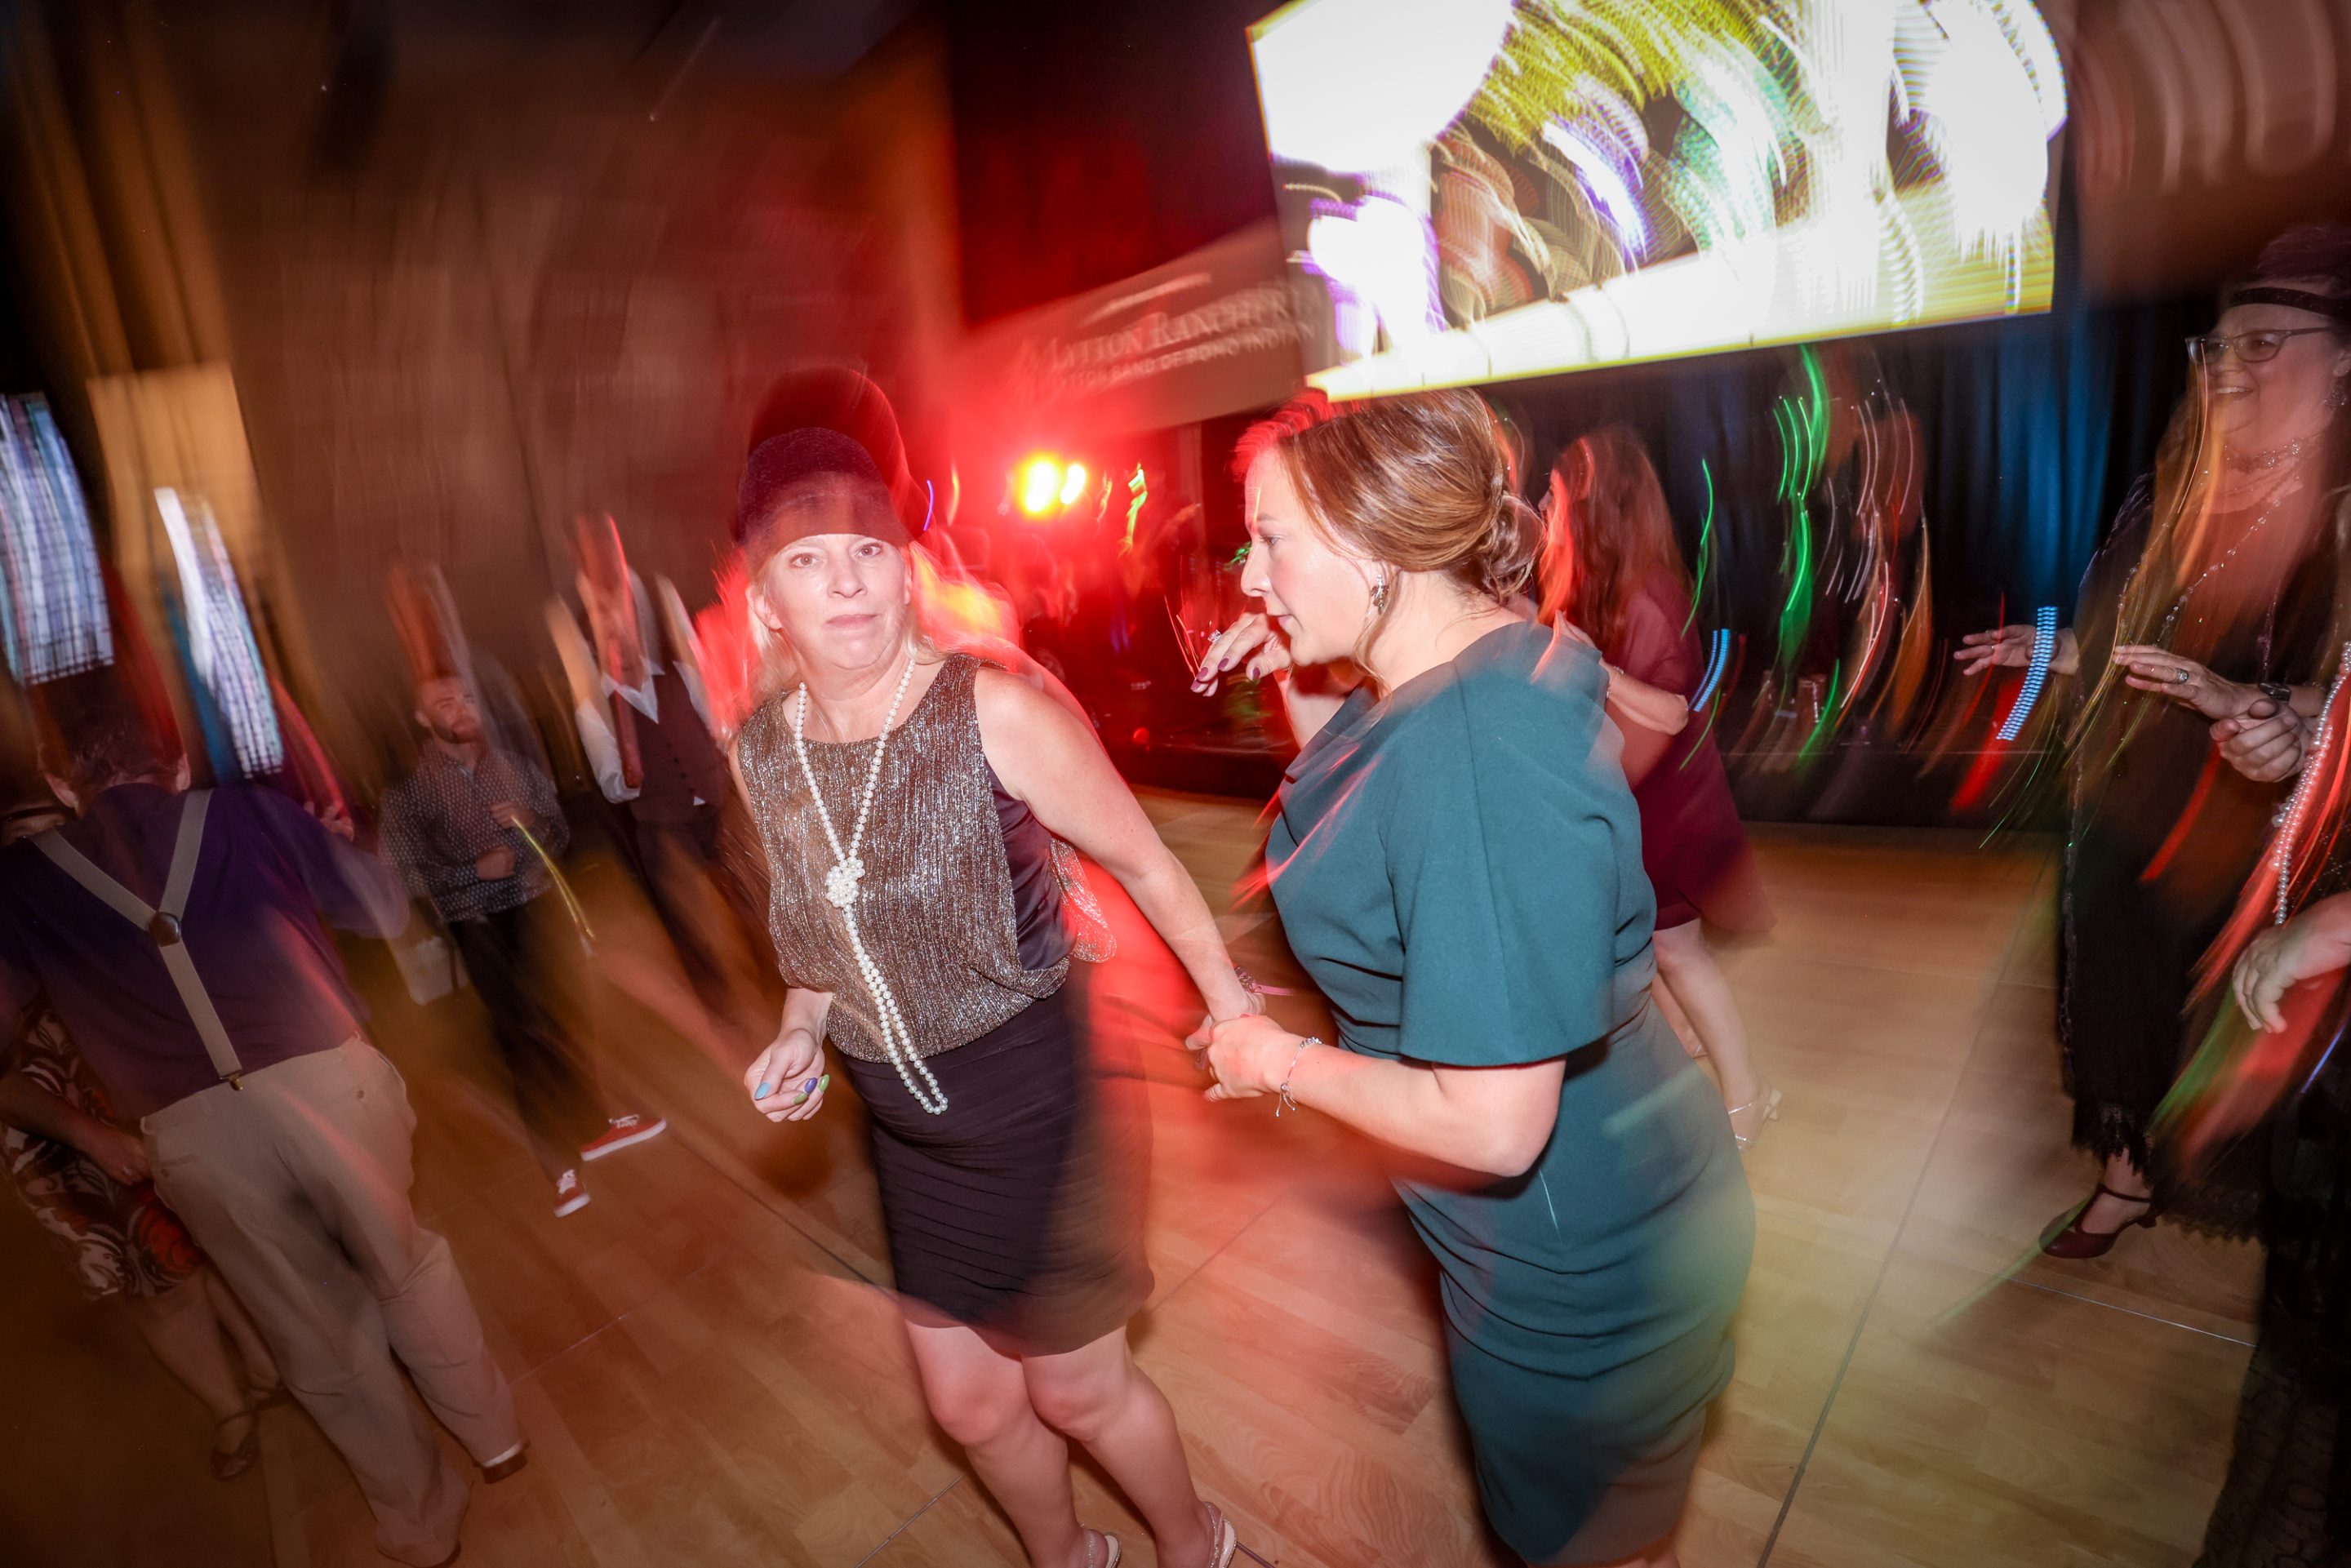 Two women dancing on a dance floor at a Santa Rosa Non-Profit event hosted by The LIME Foundation.